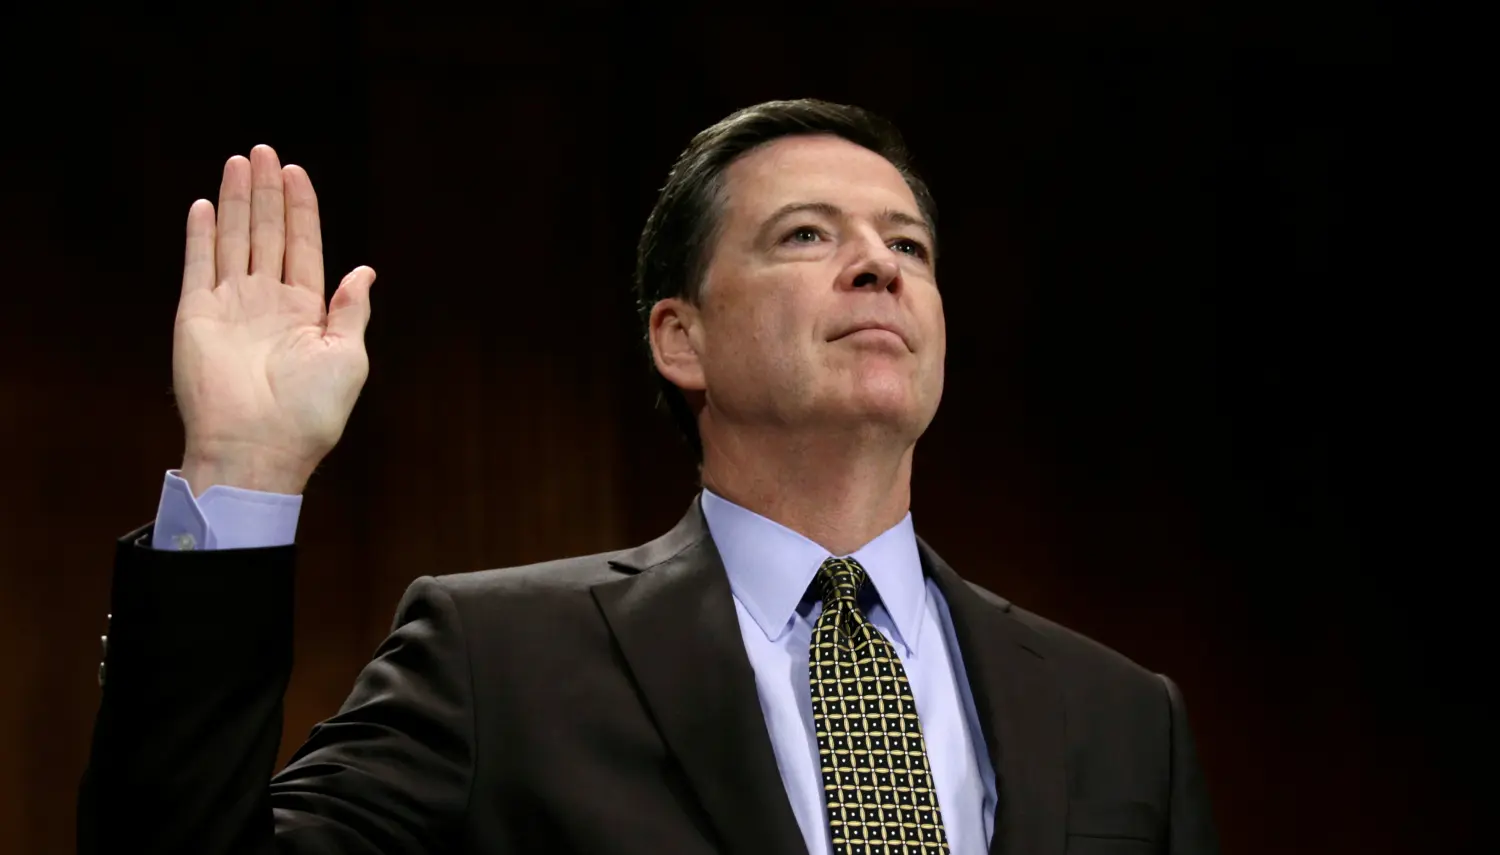 FBI Director James Comey is sworn in to testify before a Senate Judiciary Committee